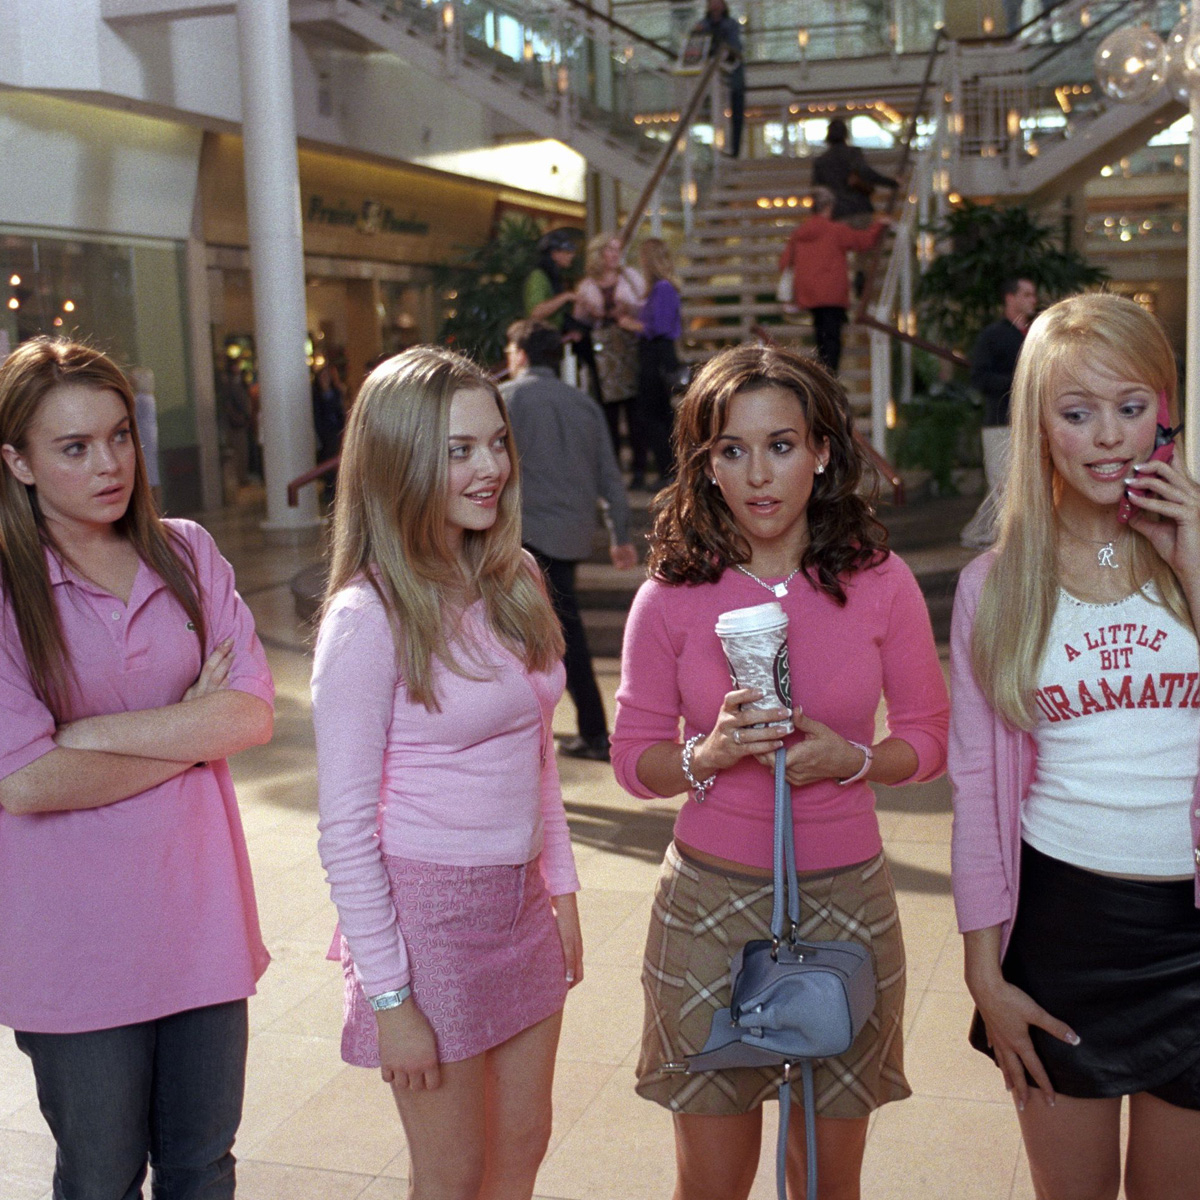 Lindsay Lohan Gives Details on That Fetch Mean Girls Reunion